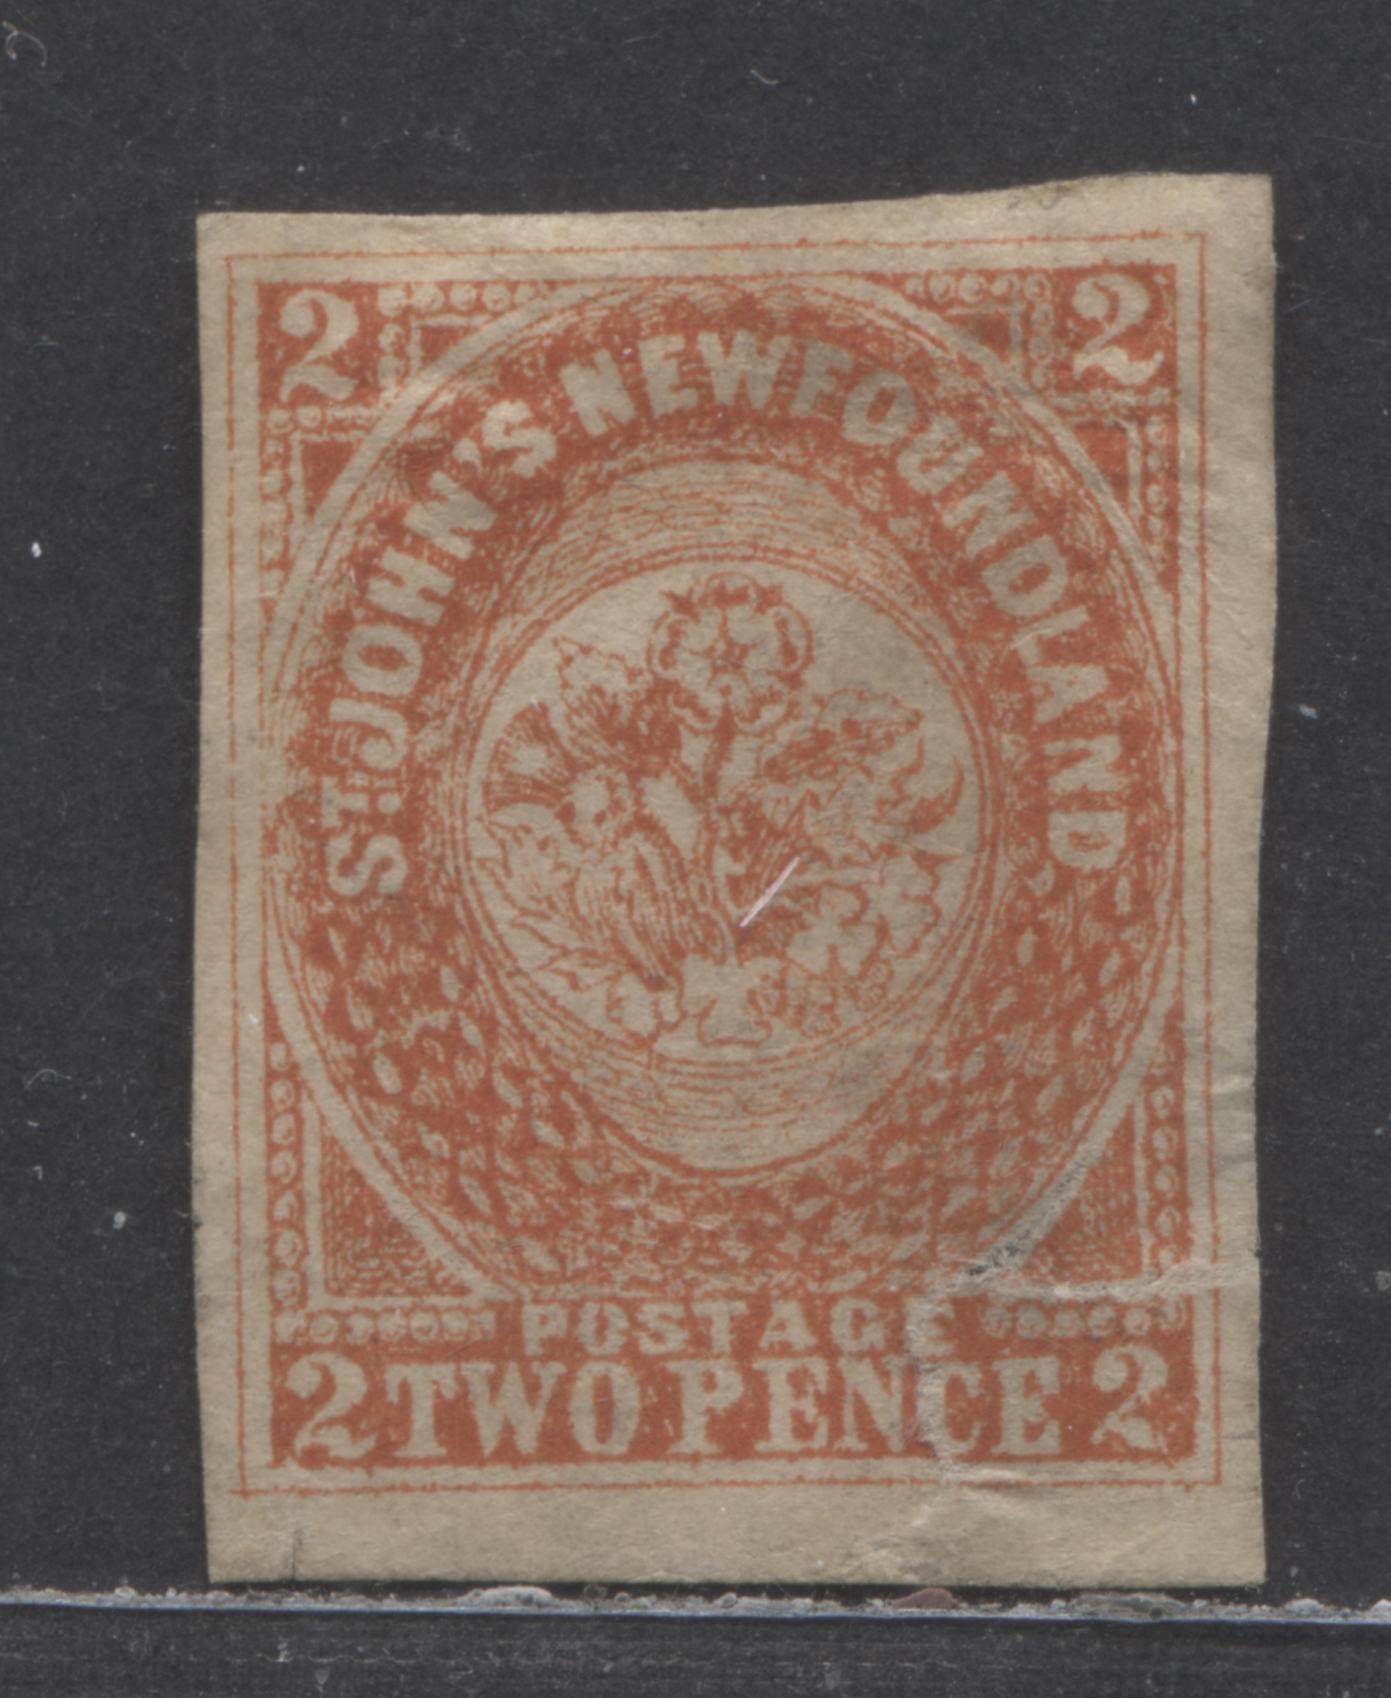 Lot 7 Newfoundland #11f 2d Orange, 1860 Second Issue, A Ungraded Single of a Lithographed Forgery, Sold for Reference Only